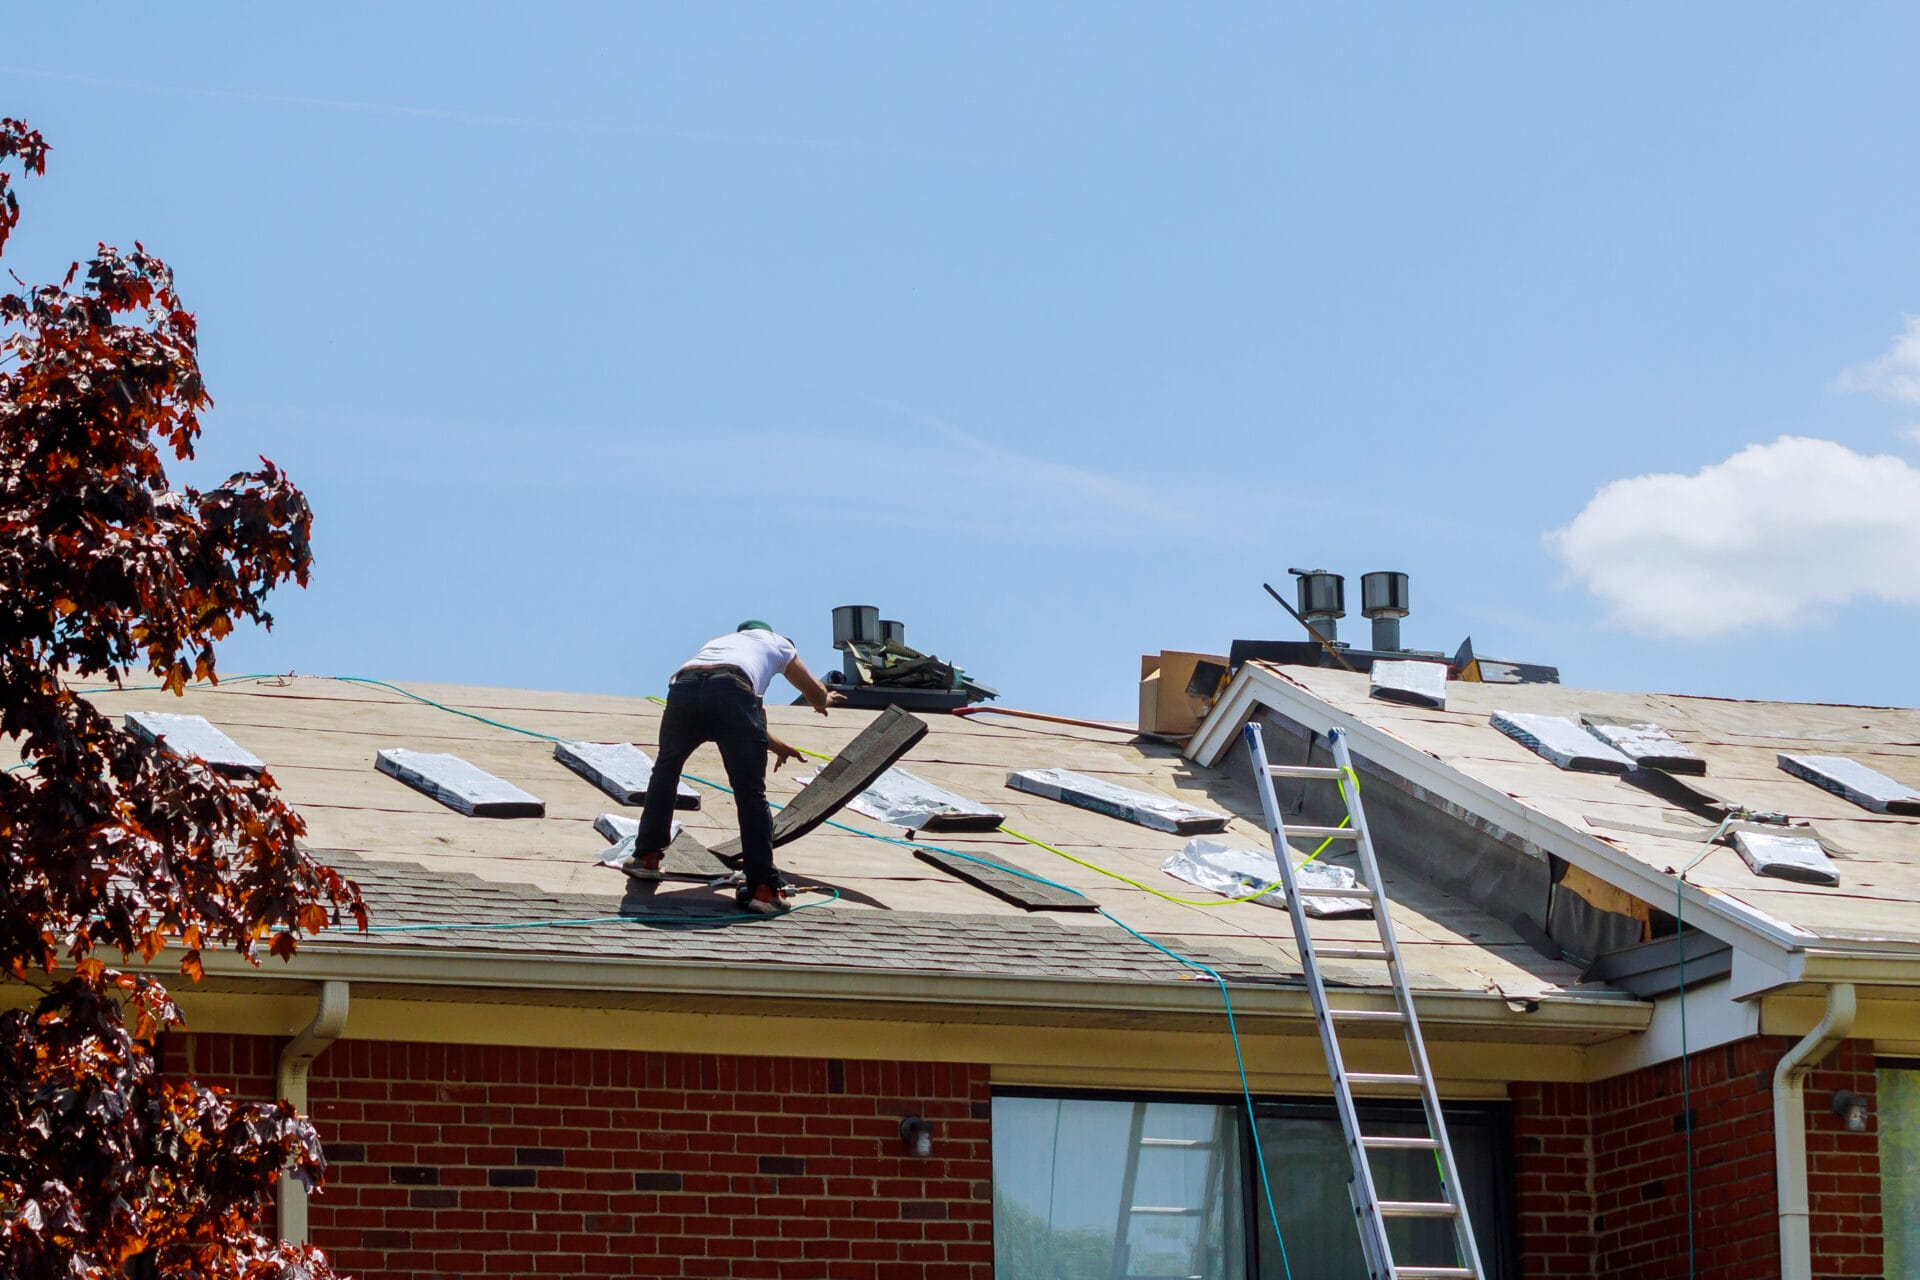 roofing contractor FAQ, finding a good roofer, how to find a roofer